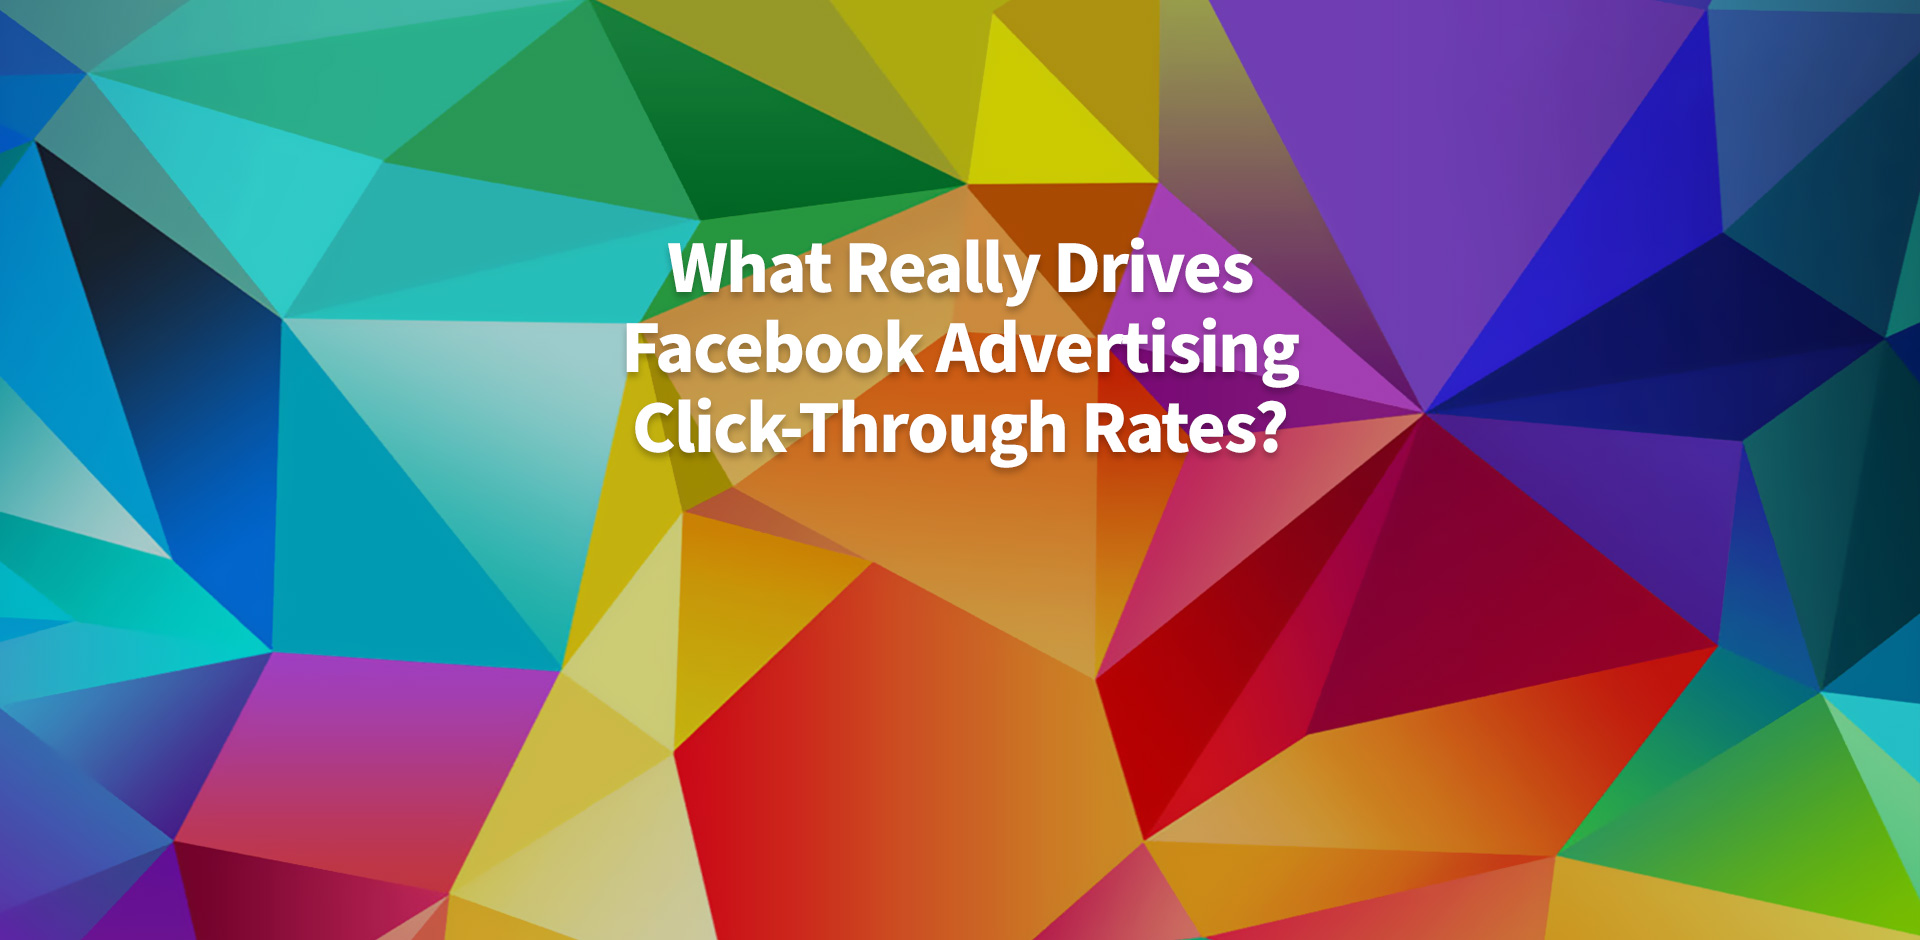 What Really Drives Facebook Advertising Click-Through Rates?